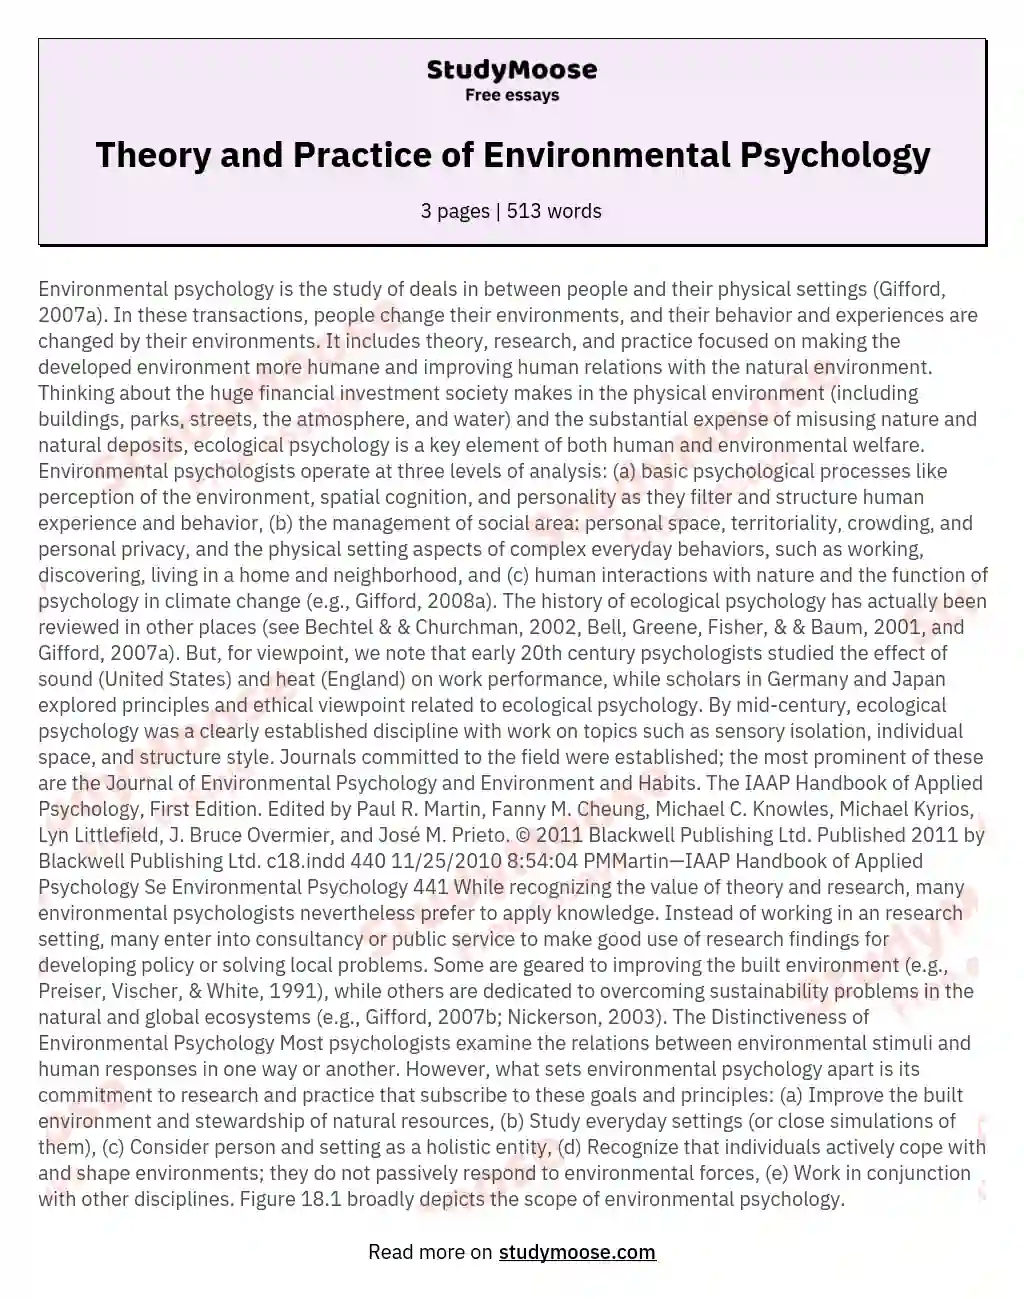 Theory and Practice of Environmental Psychology essay